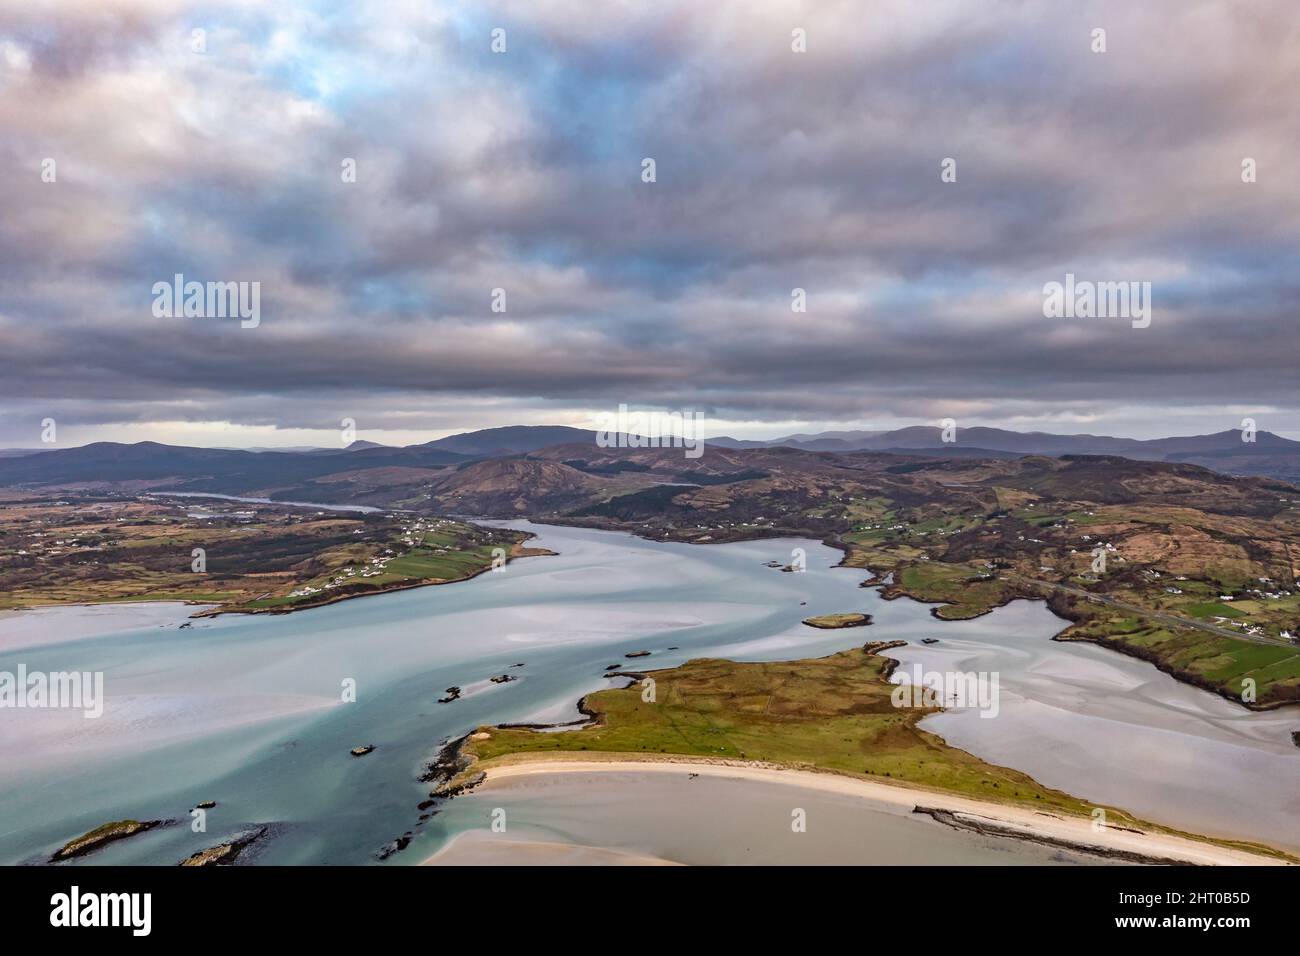 Gweebarra Bay between Lettermacaward and Portnoo in County Donegal - Ireland. Stock Photo